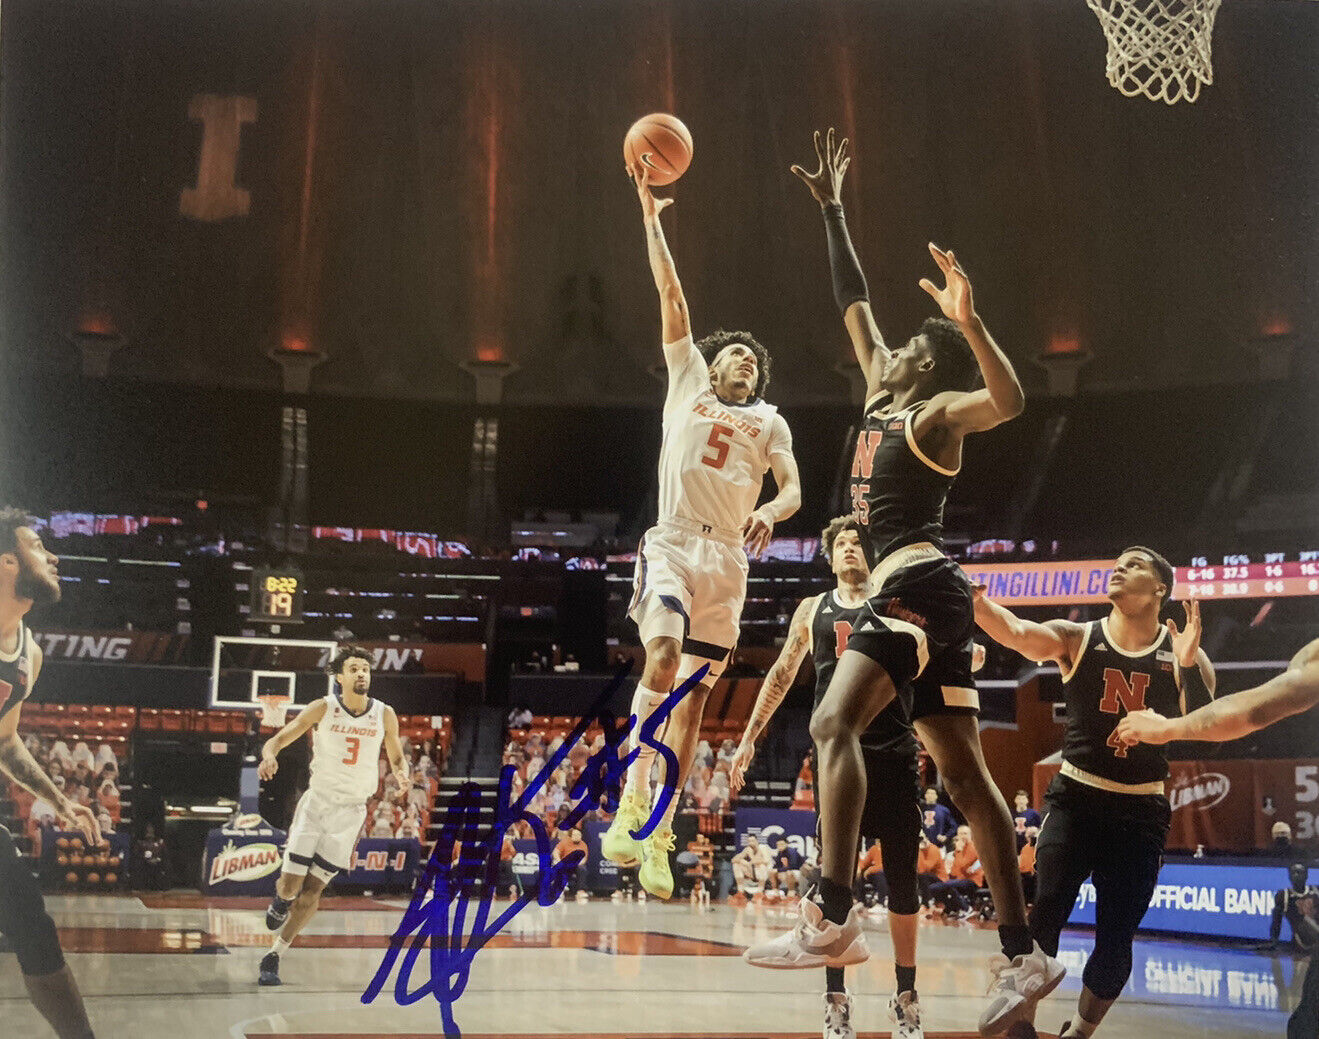 ANDRE CURBELO HAND SIGNED 8x10 Photo Poster painting ILLINOIS BASKETBALL AUTOGRAPH RARE COA